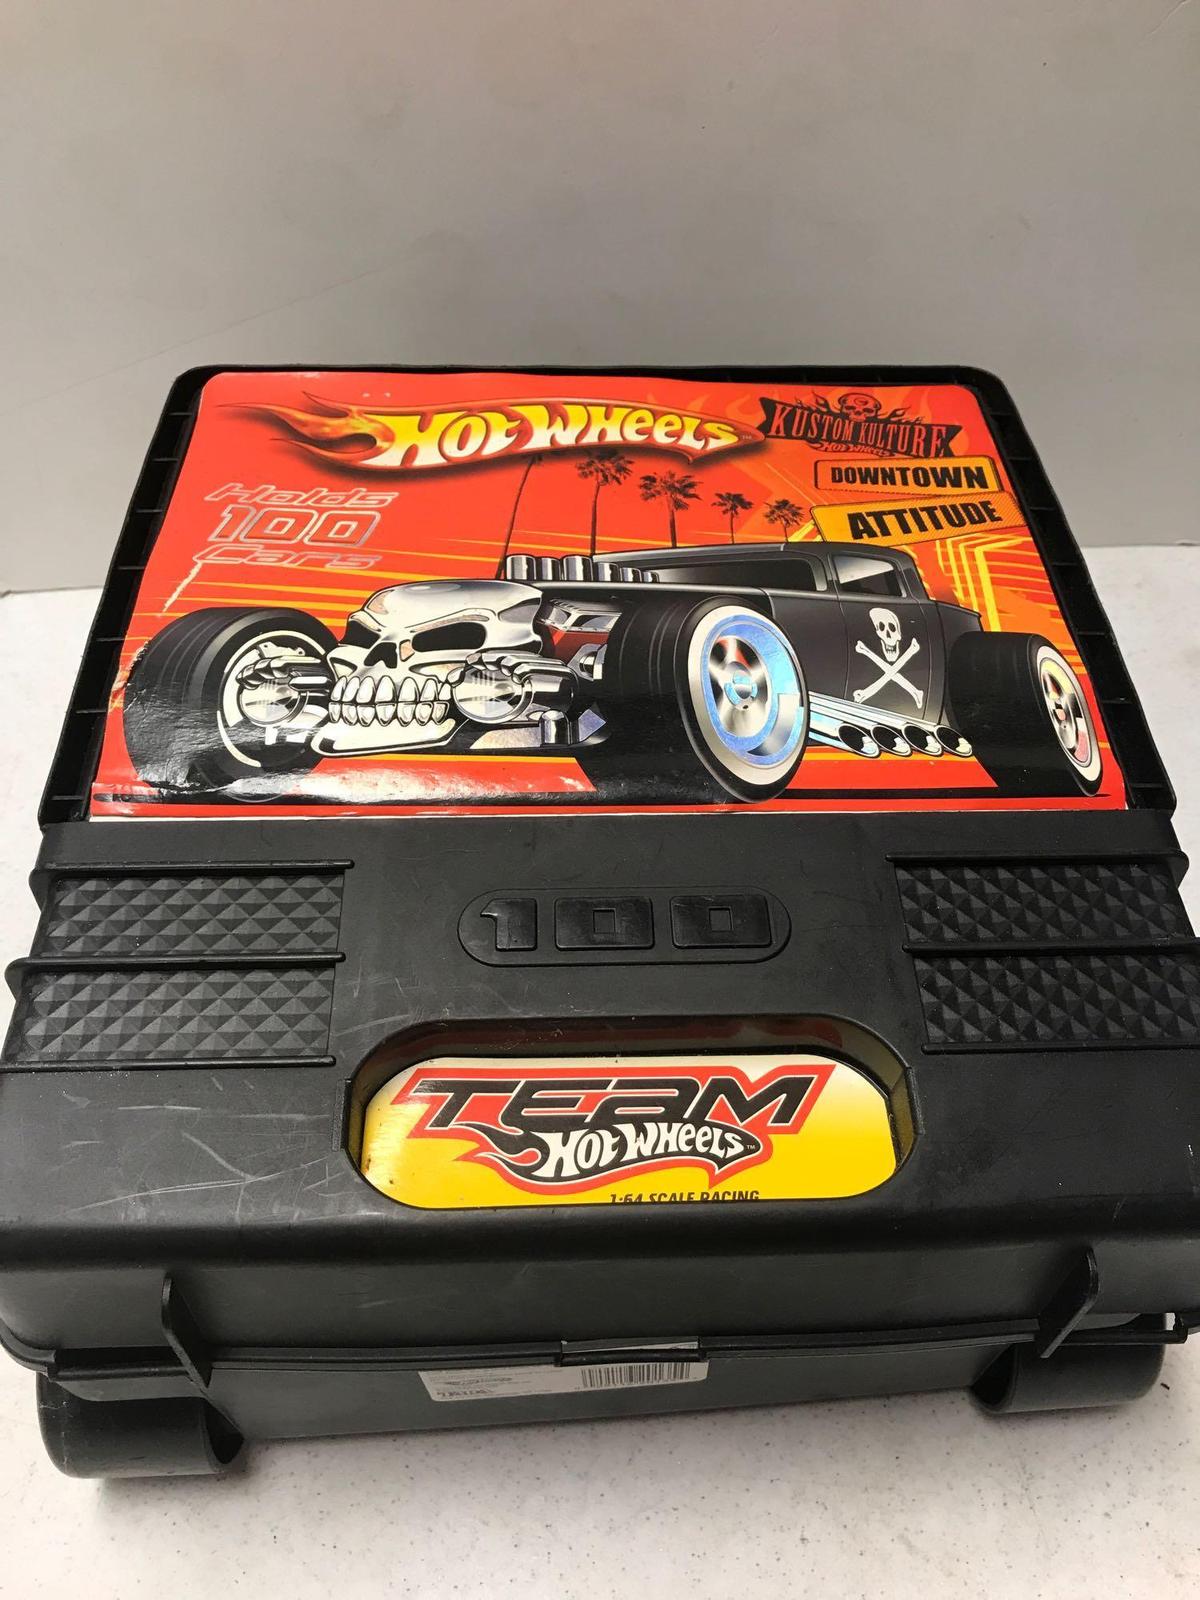 B-1 Hot wheels carrying case filled with hot wheels cars